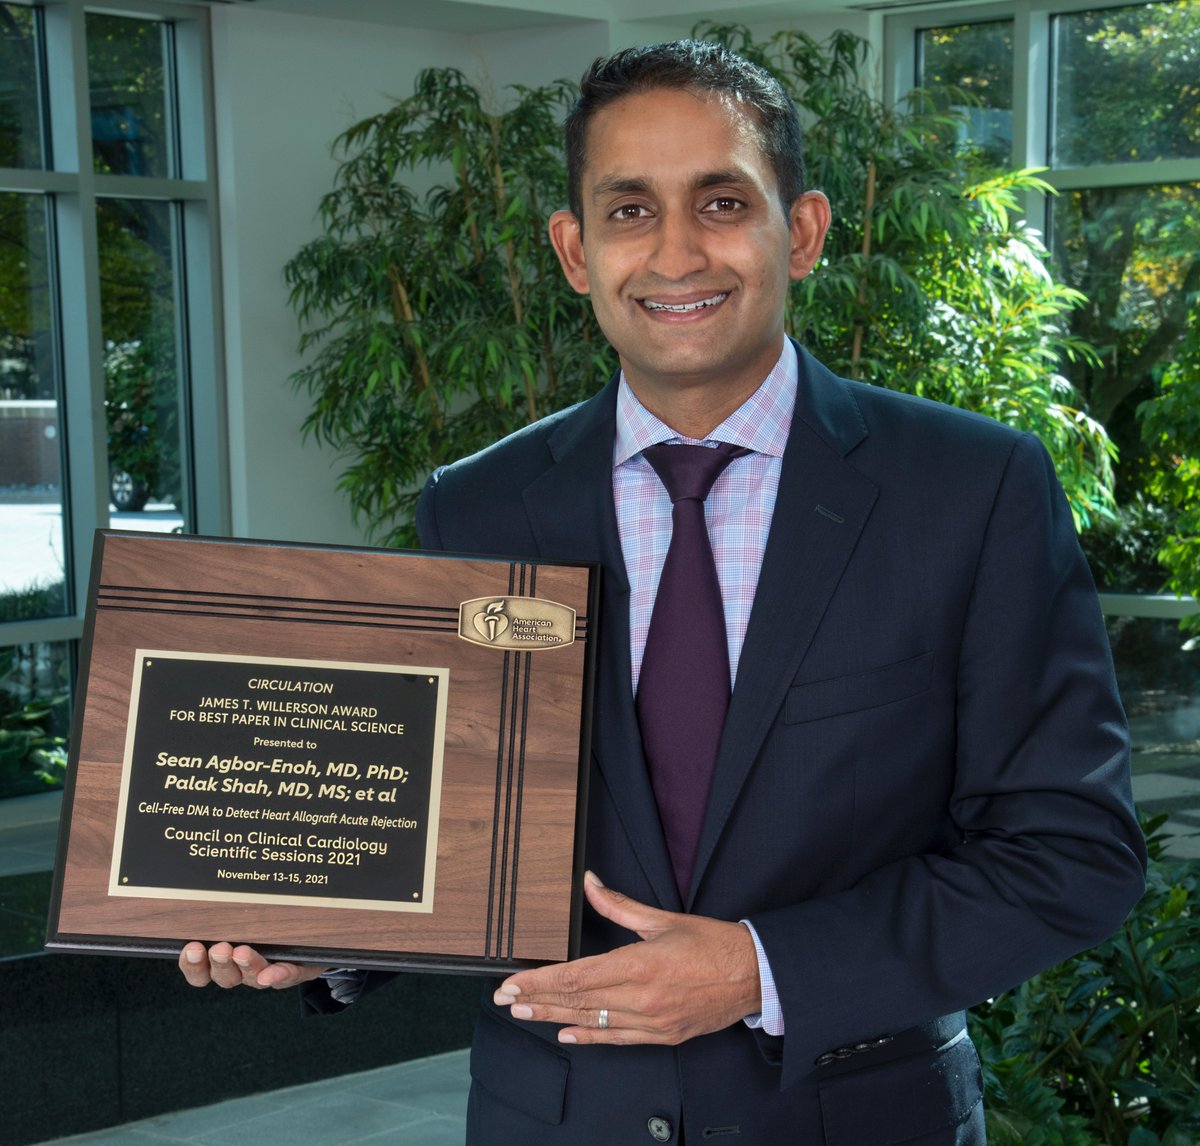 We are proud to announce @PalakShahMD received 2021 James T Willerson Award for Top Clinical Research for his @CircAHA paper, Cell-Free DNA Heart Allograft Acute Rejection. 
Great to see this recognition of the outstanding Clinical Research at @IHVInews  
 bit.ly/3D0czmr